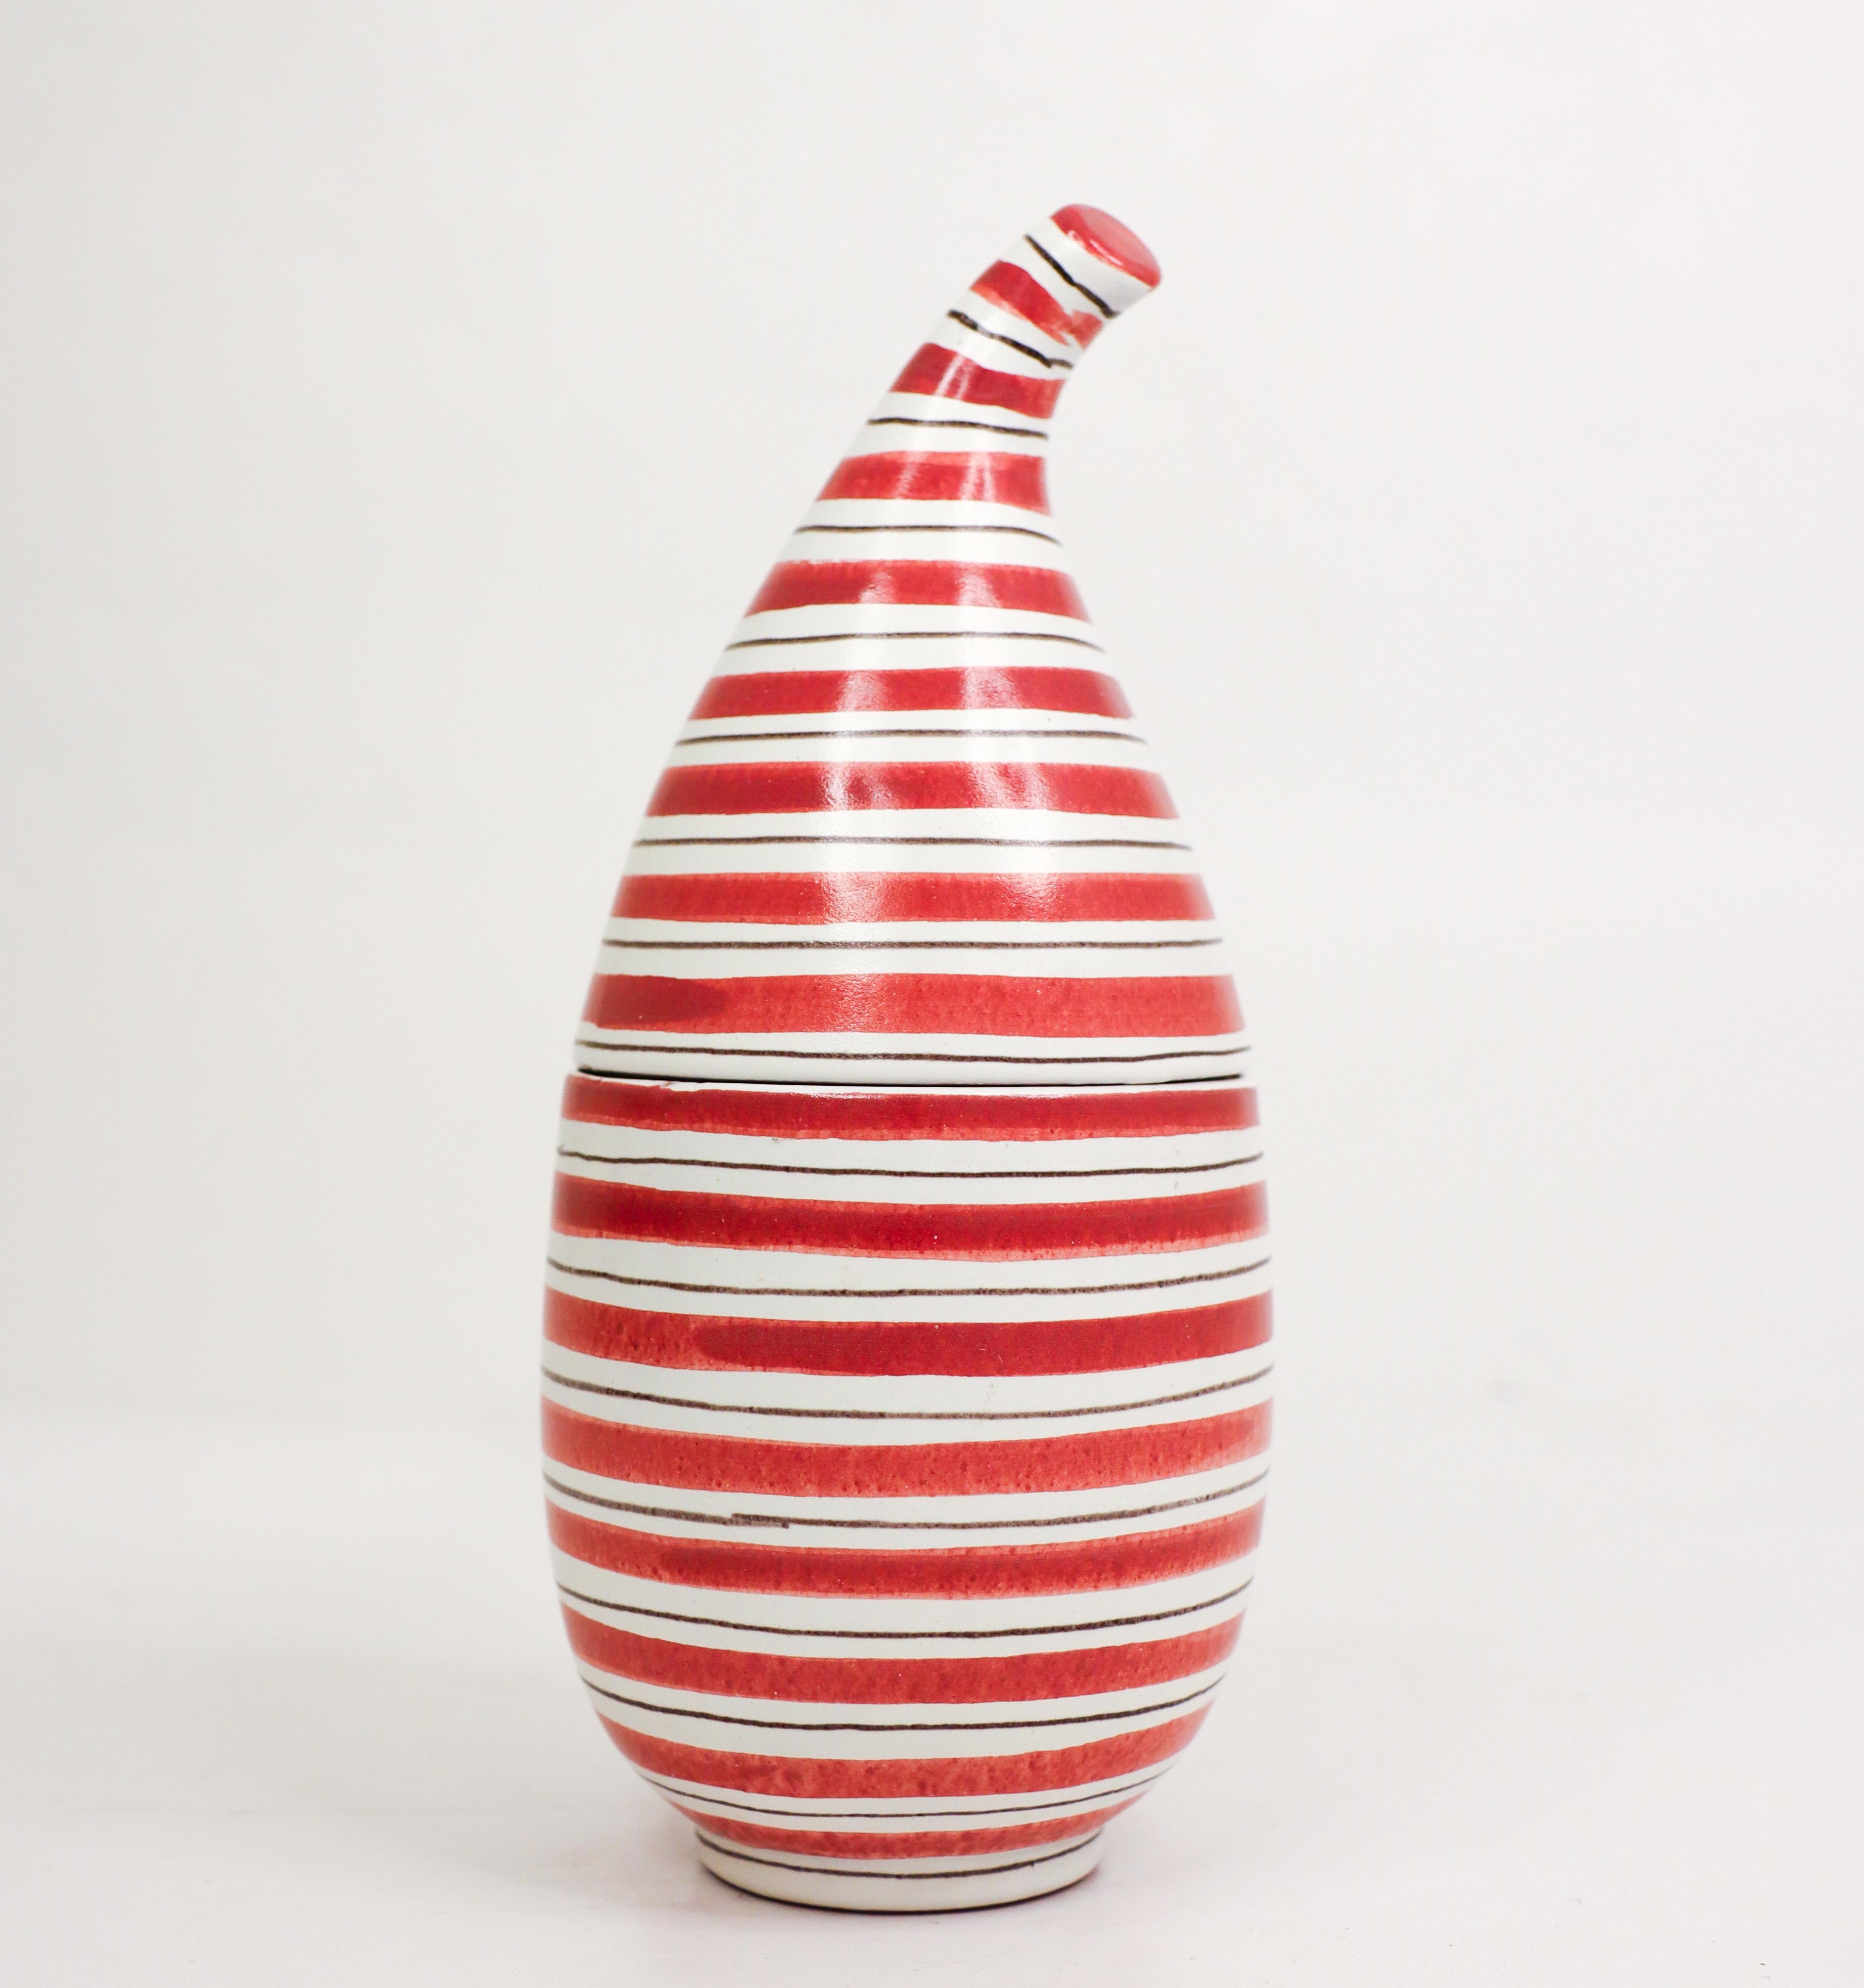 A really rare lidded bowl, red and white striped with lid in faience designed by Stig Lindberg at Gustavsberg in the 1950s. It is 19 cm high and in excellent condition except from two small over-painted chips on the lid and another small mark on the